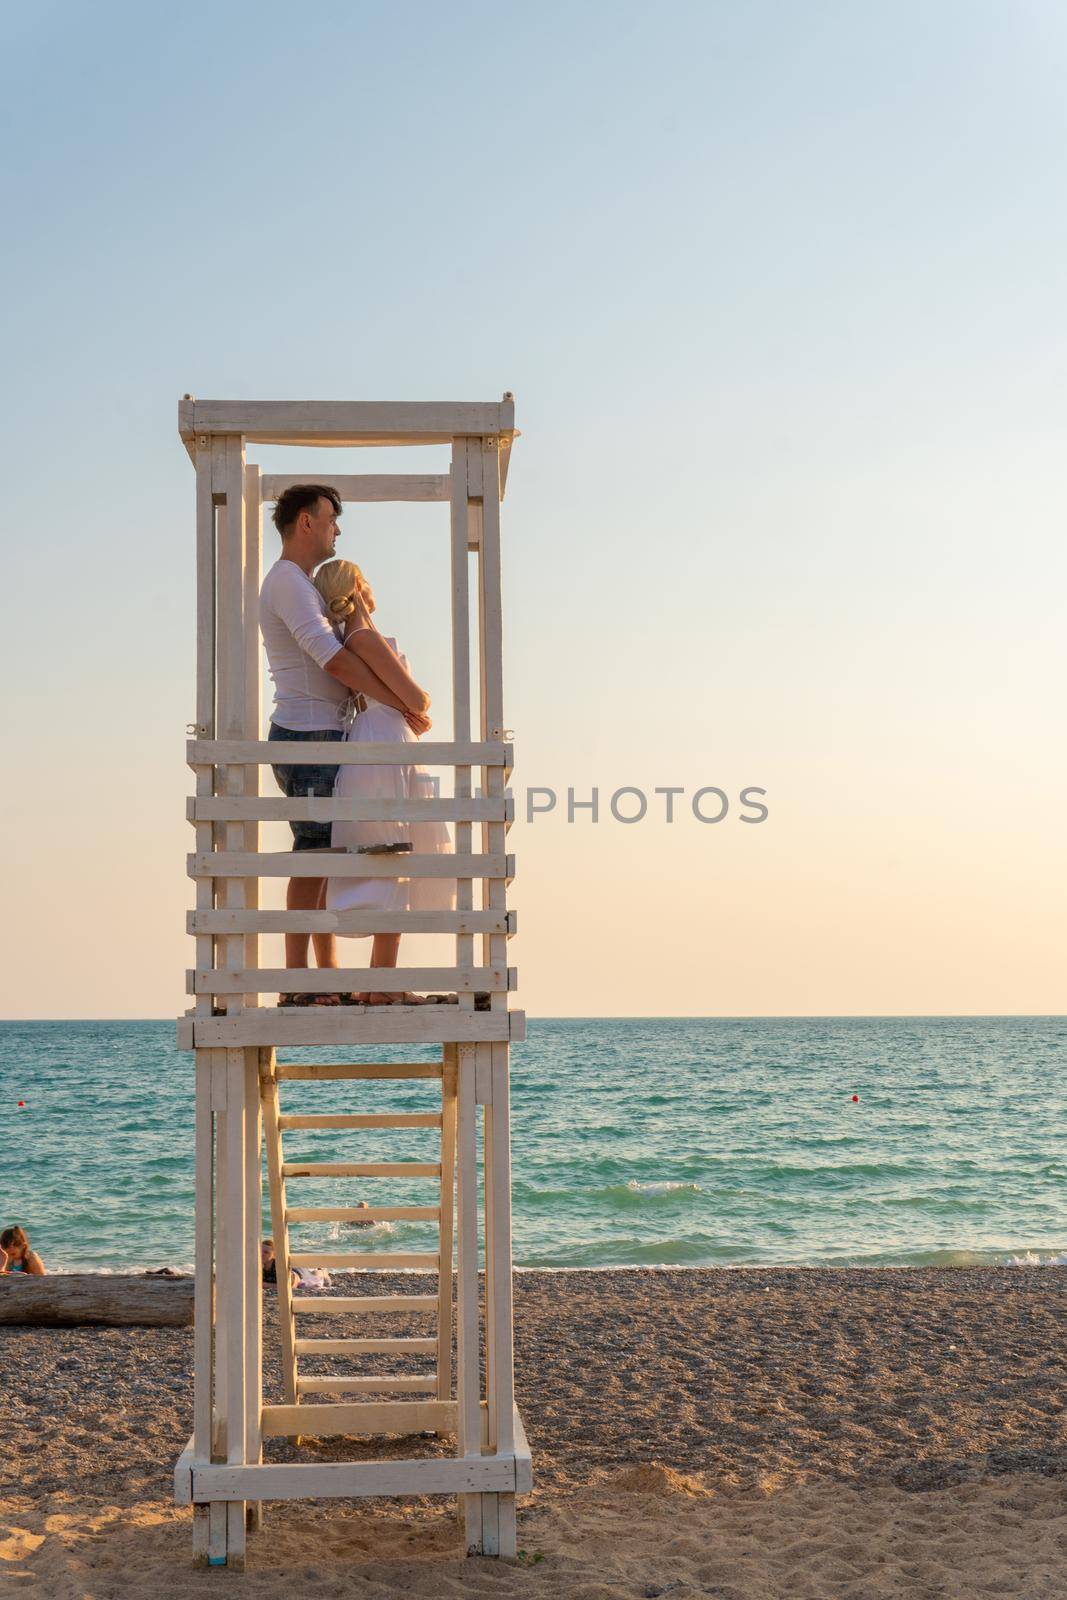 Love girl lifeguard guy pair tower paradise sunrise life safety, for sand saving for shore and security holiday, post saver. Background sun hut, by 89167702191